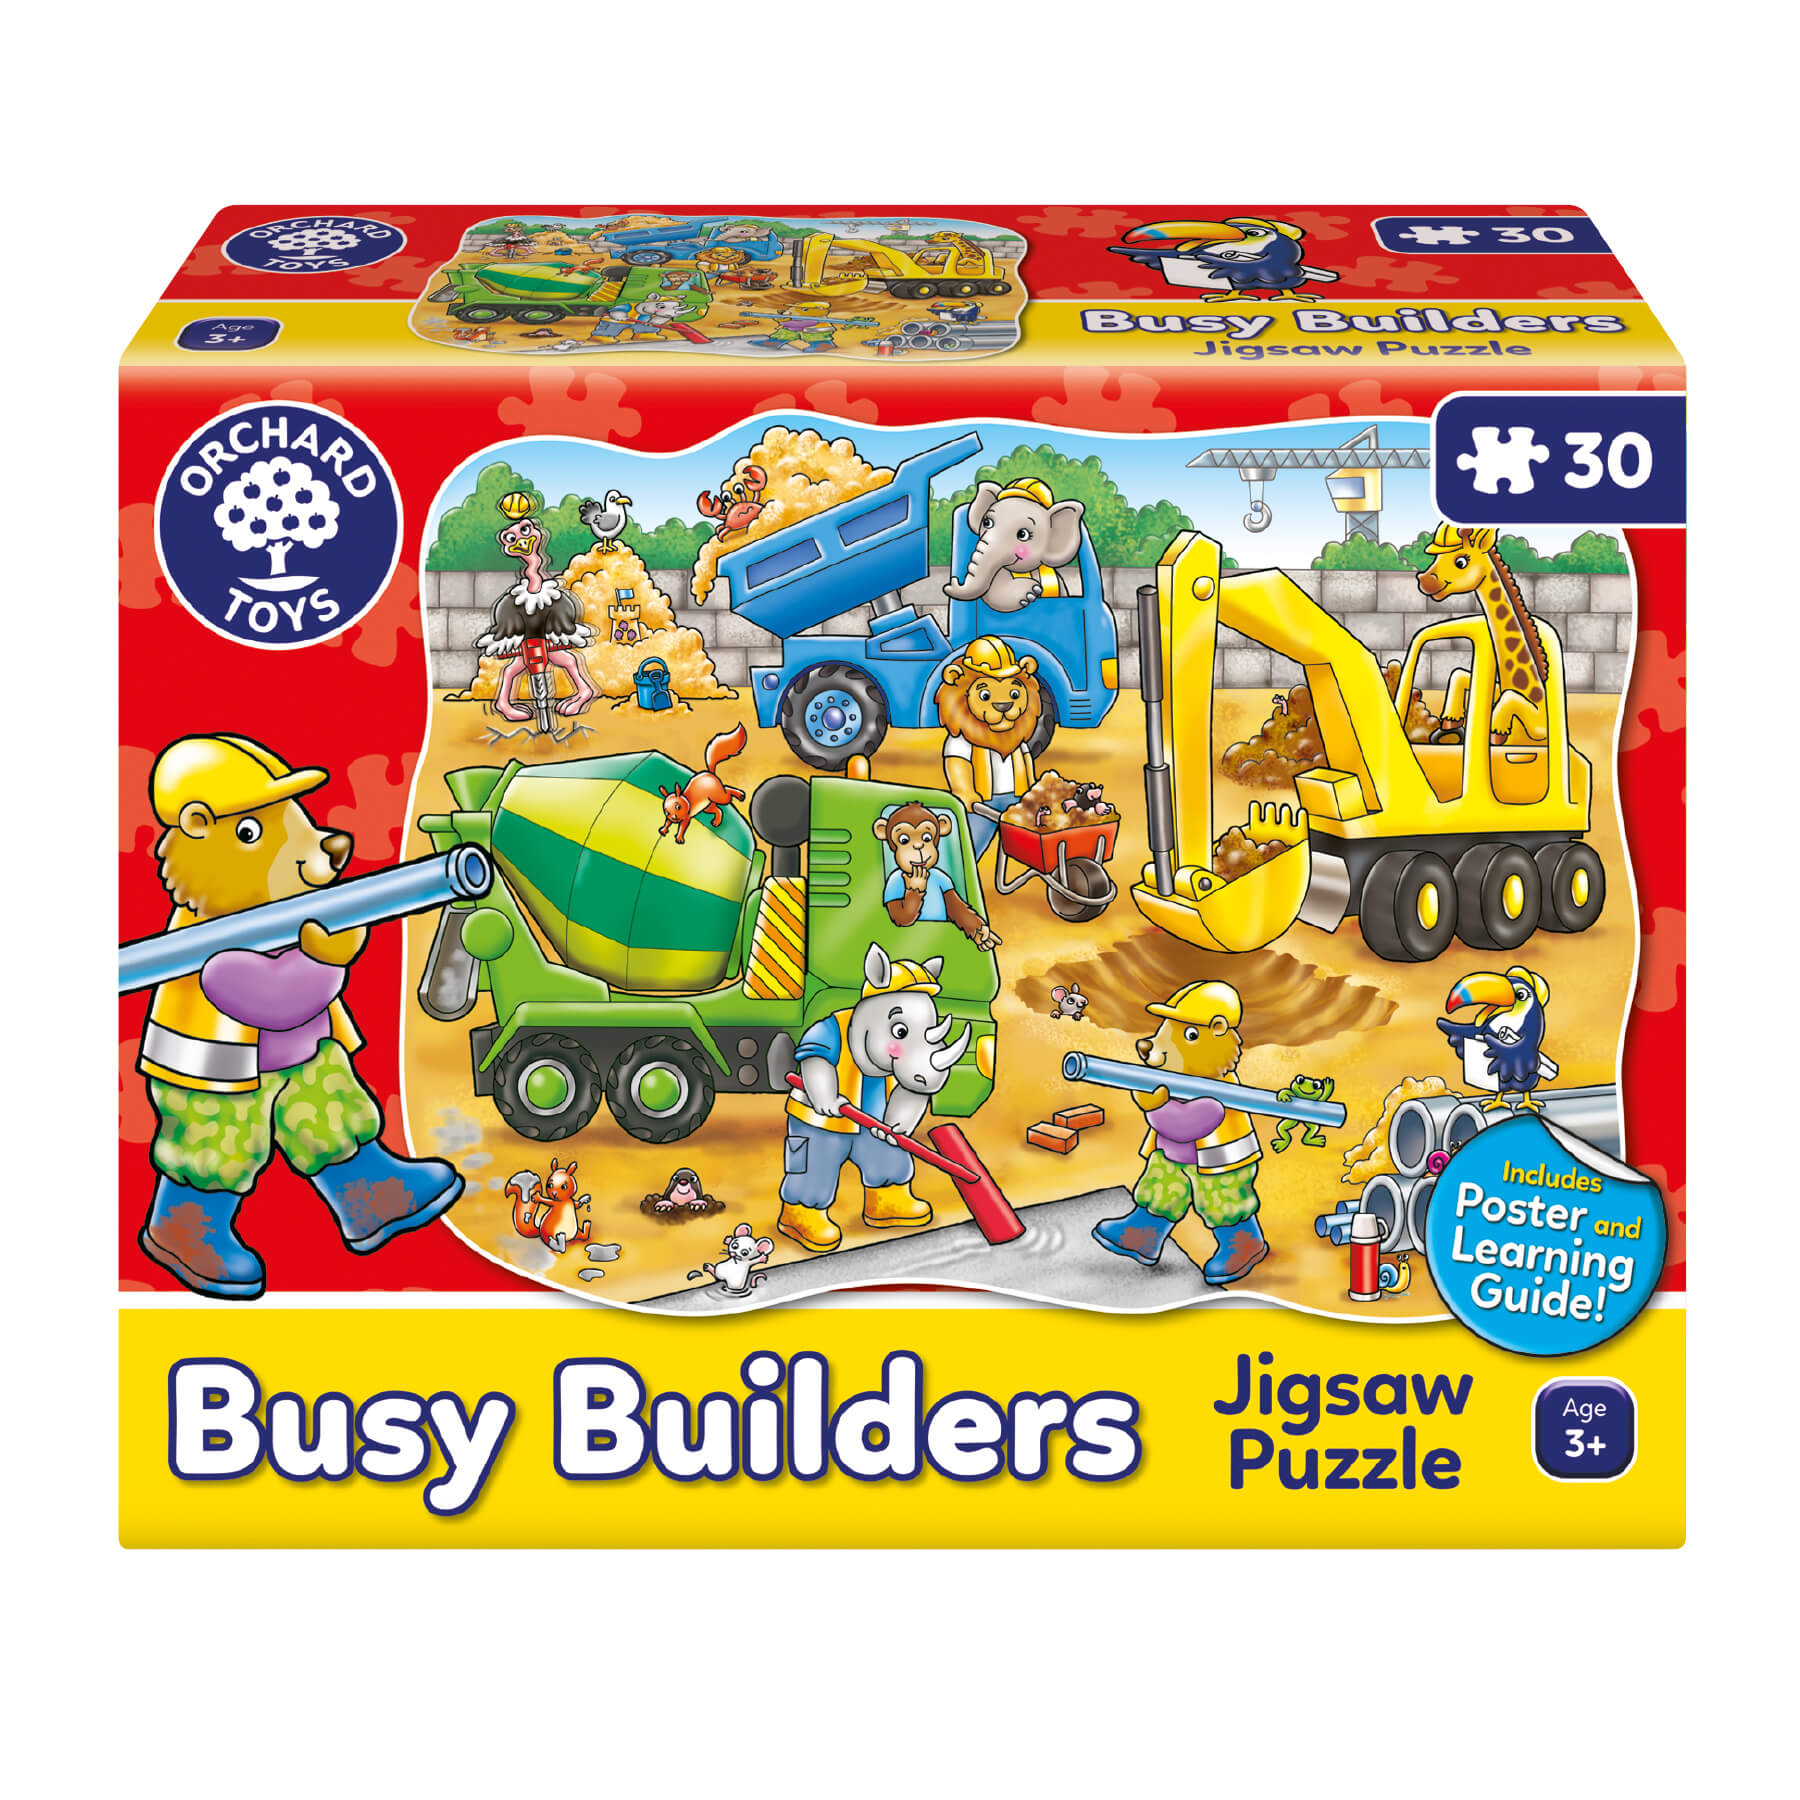 Product View - Busy Builders Jigsaw Puzzle